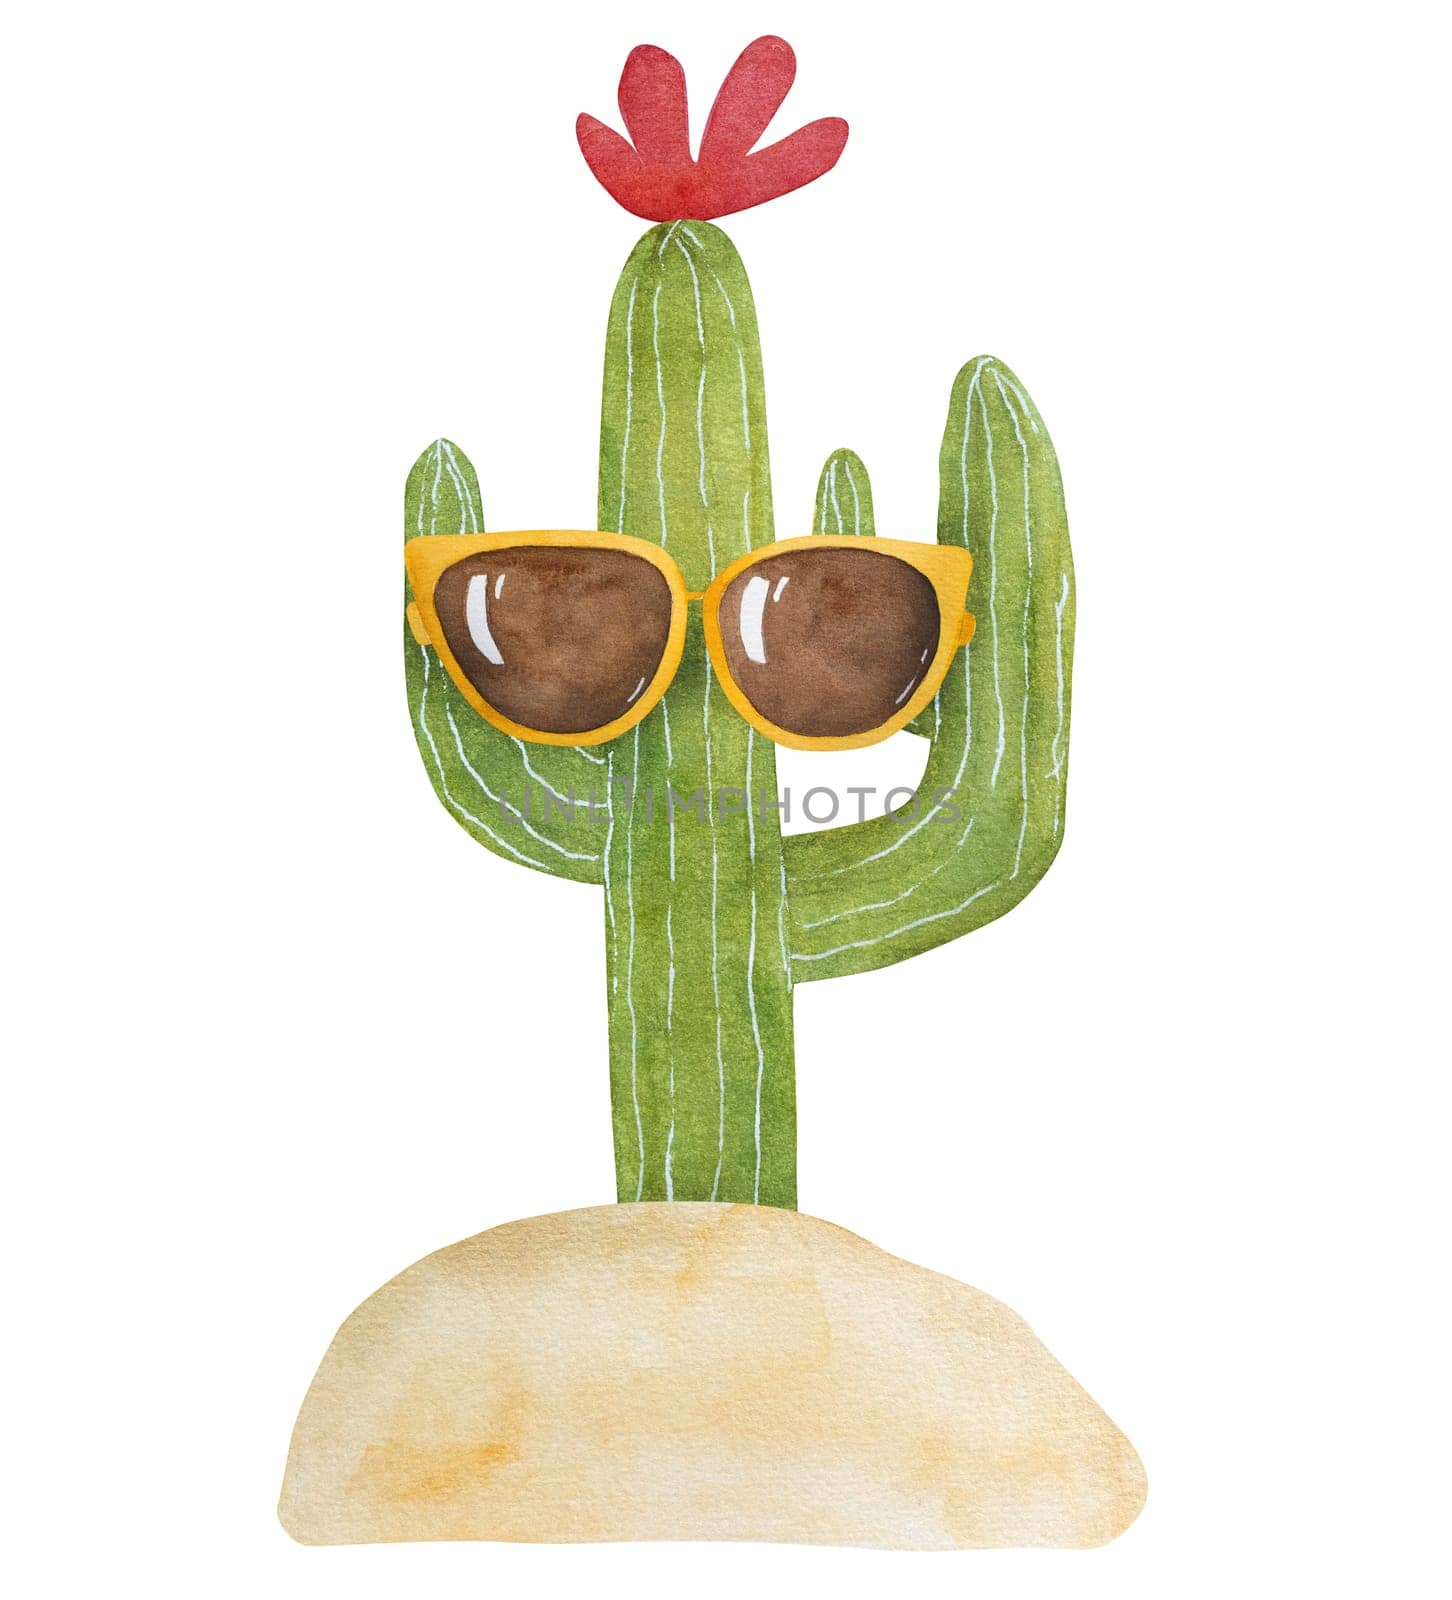 Hand-Drawn Image Of A Cheerful Cactus In Sunglasses, A Watercolor Illustration On A Vacation Theme, Is A Clipart On A White Background